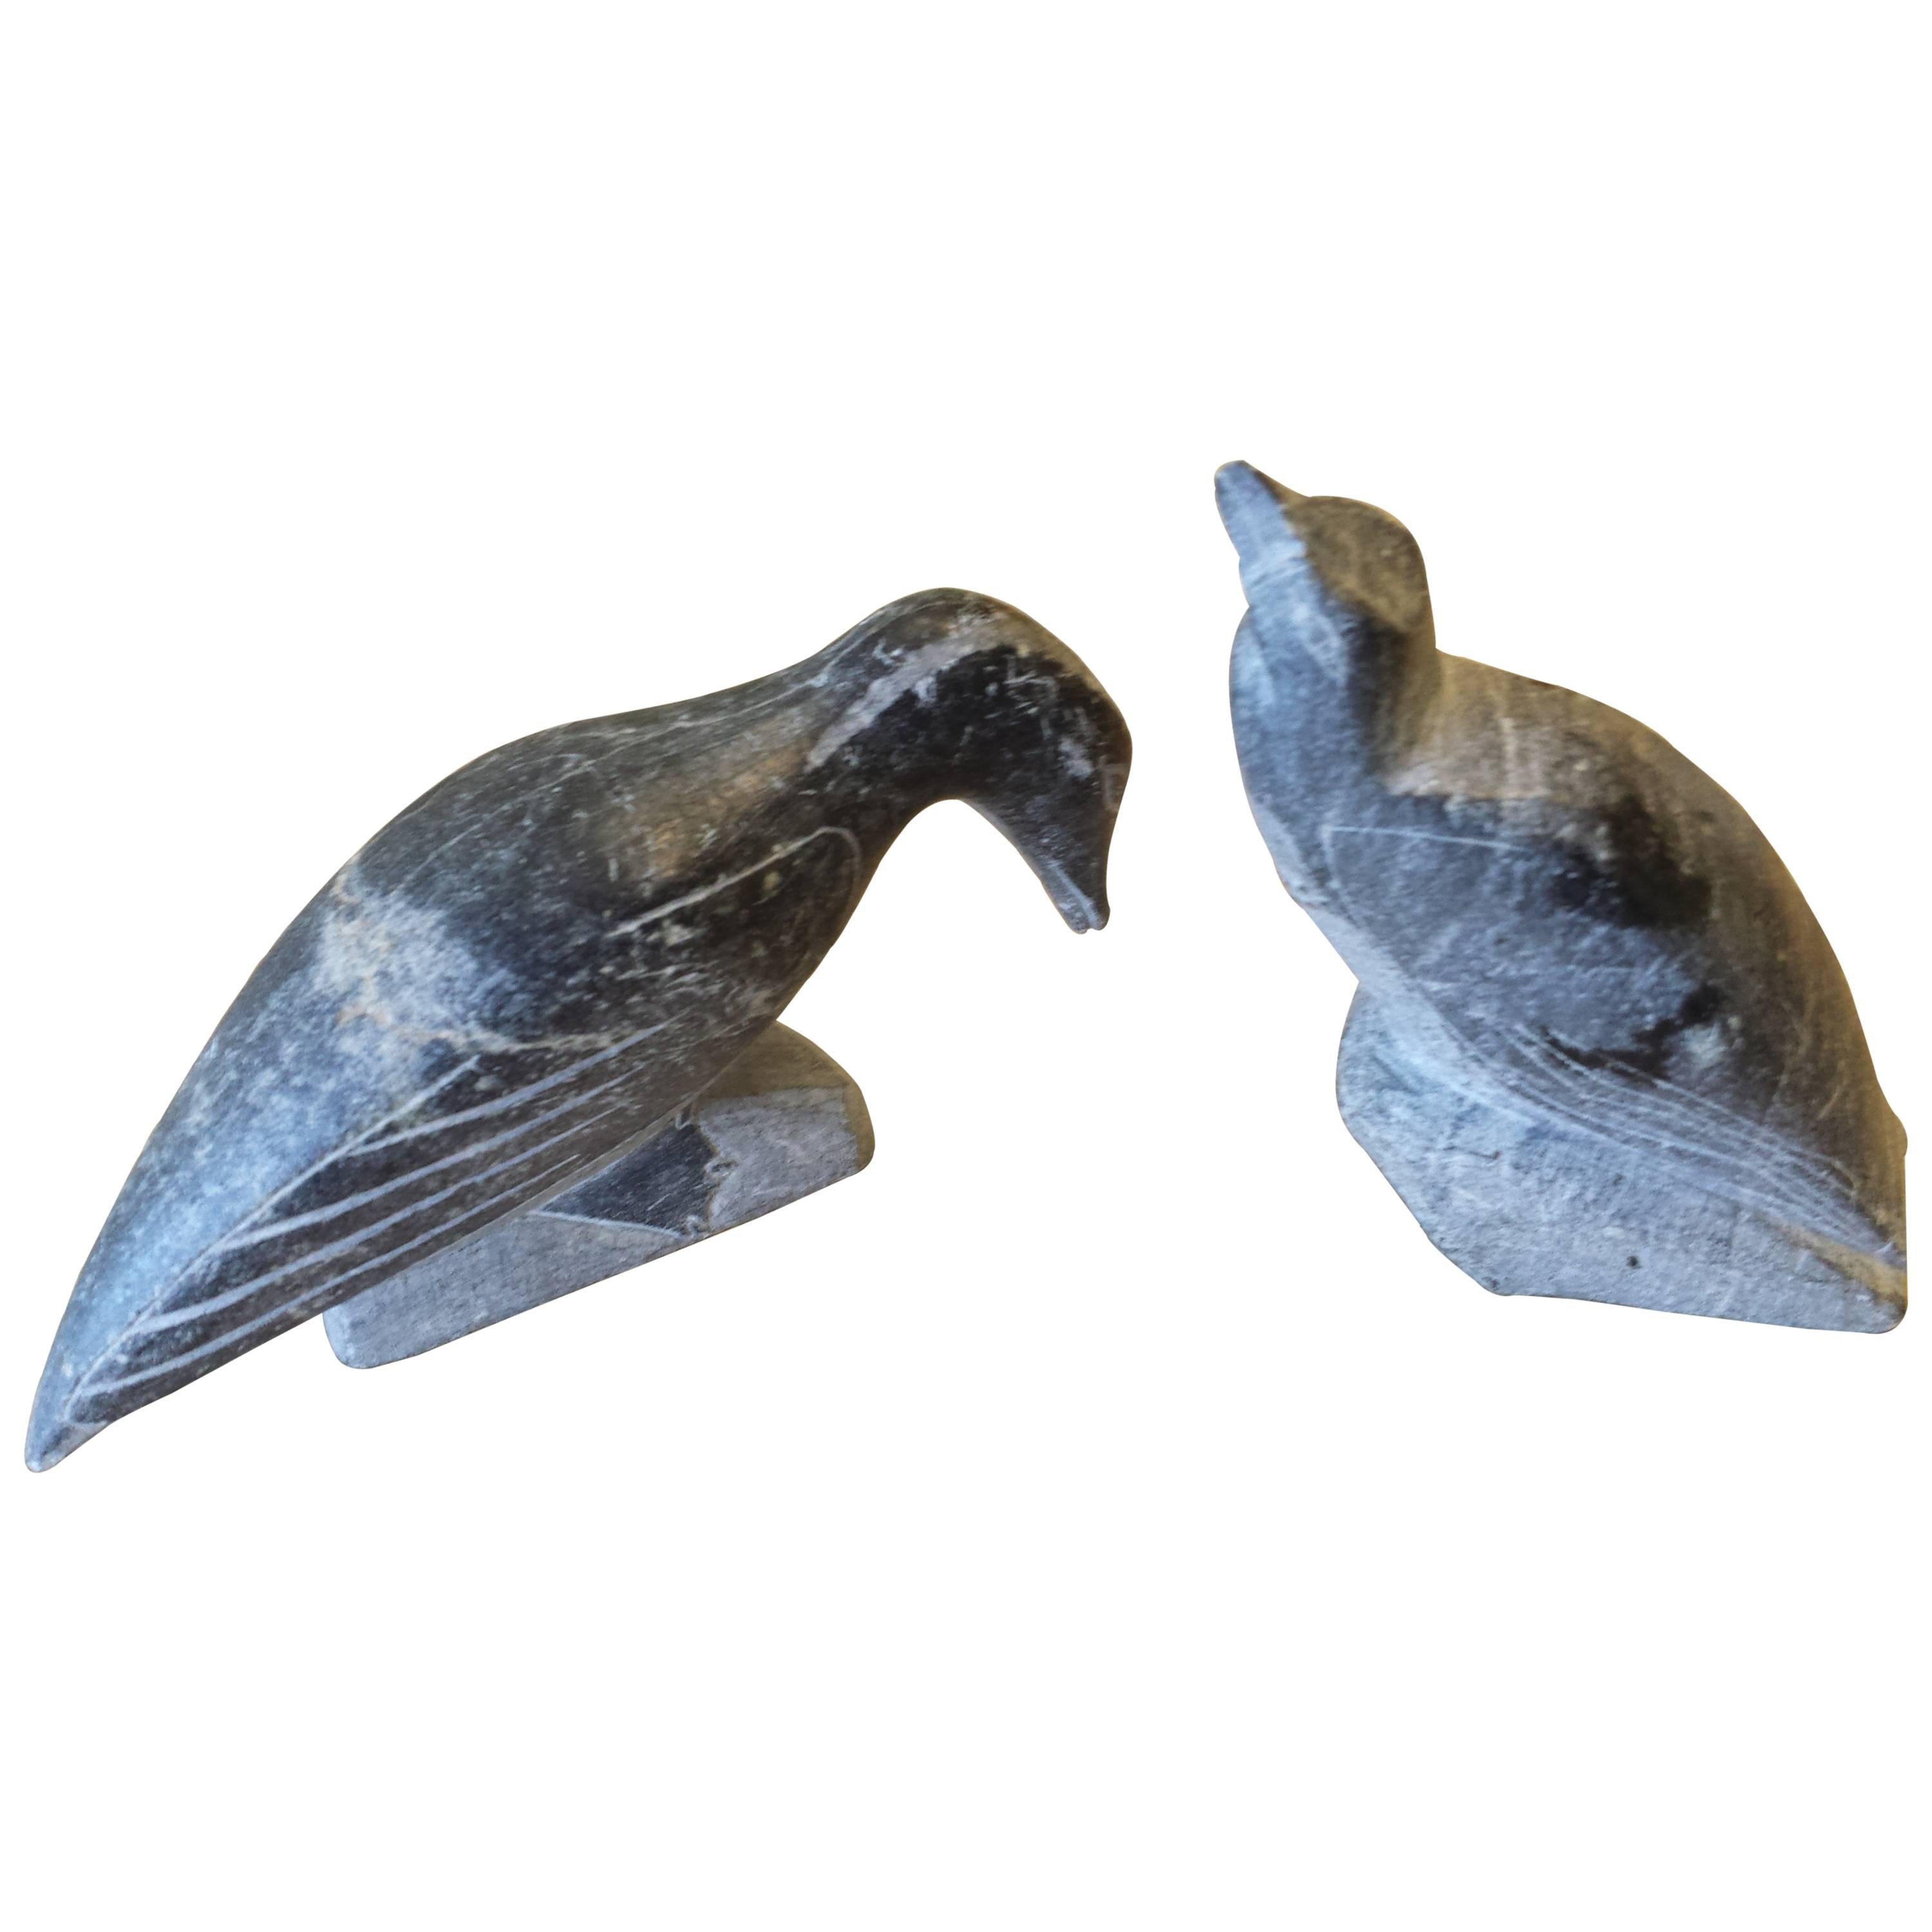 Pr. of Soapstone Sculptures Inuit Birds Signed Syllabics E Number for Carver ID. For Sale